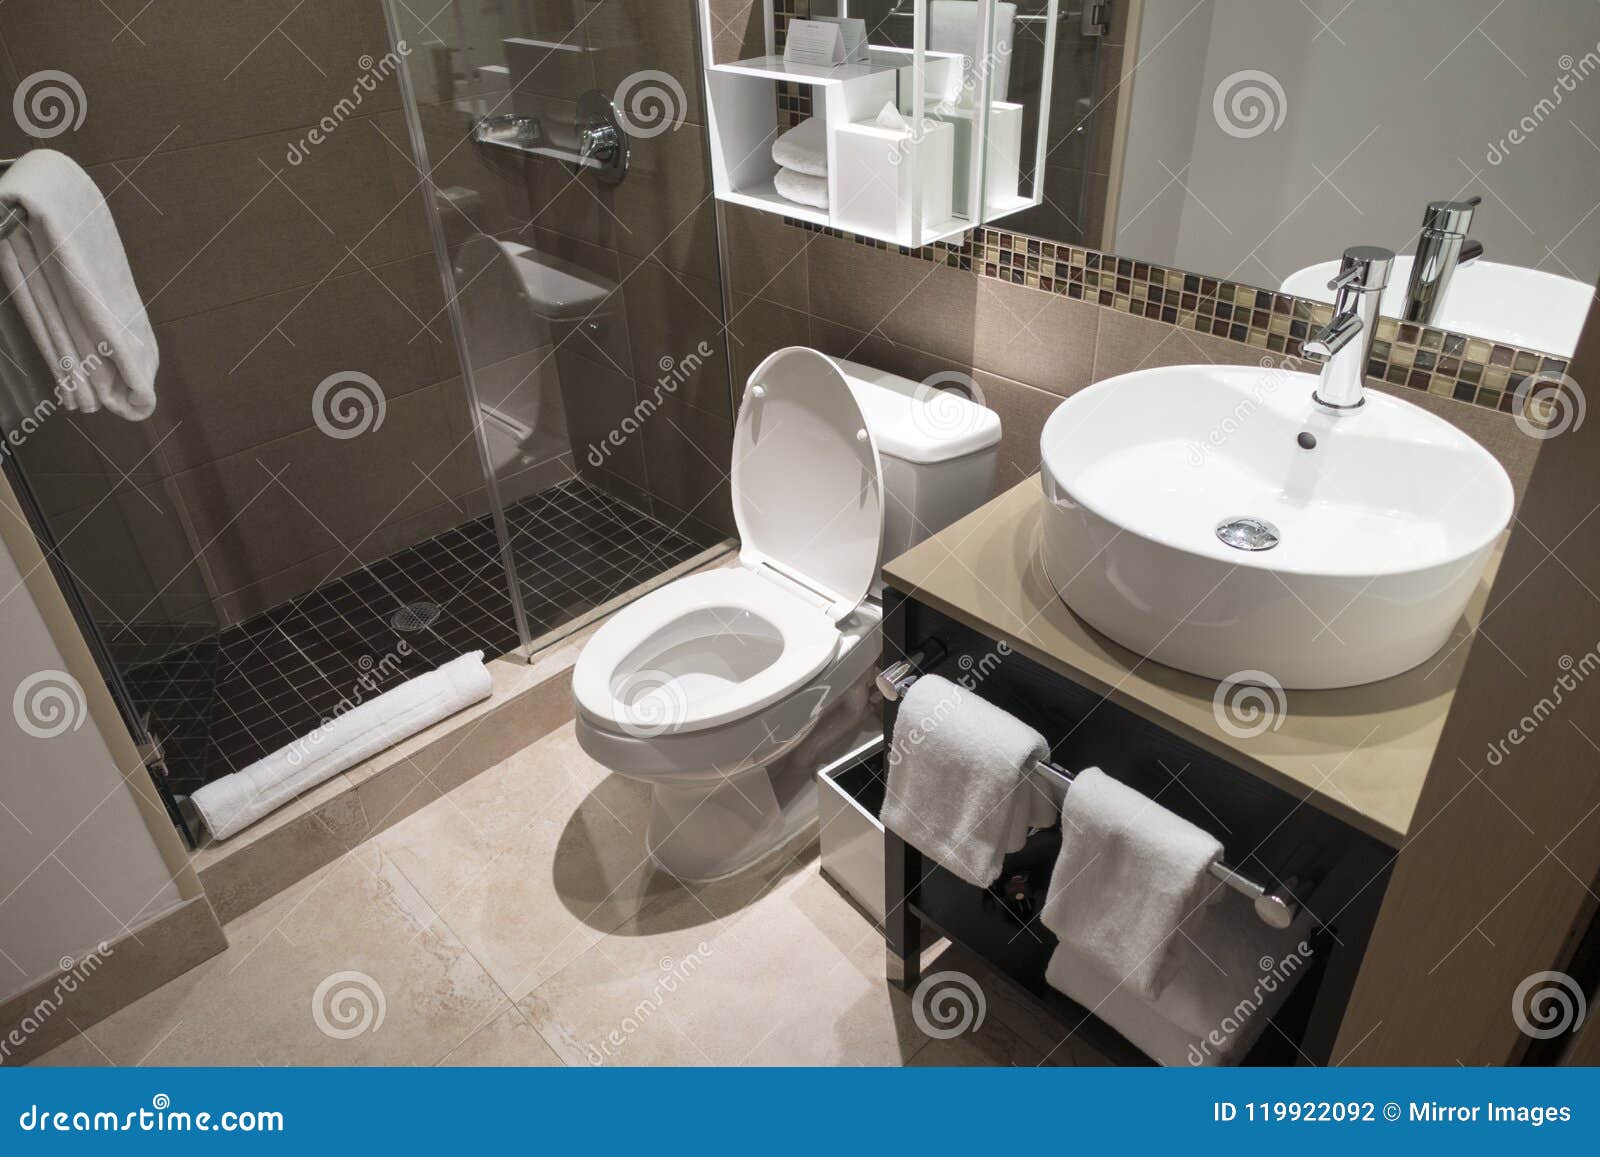 Modern Bathroom Sink And Toilet And Staning Shower With Glass Shower Doors Stock Photo Image Of Sink